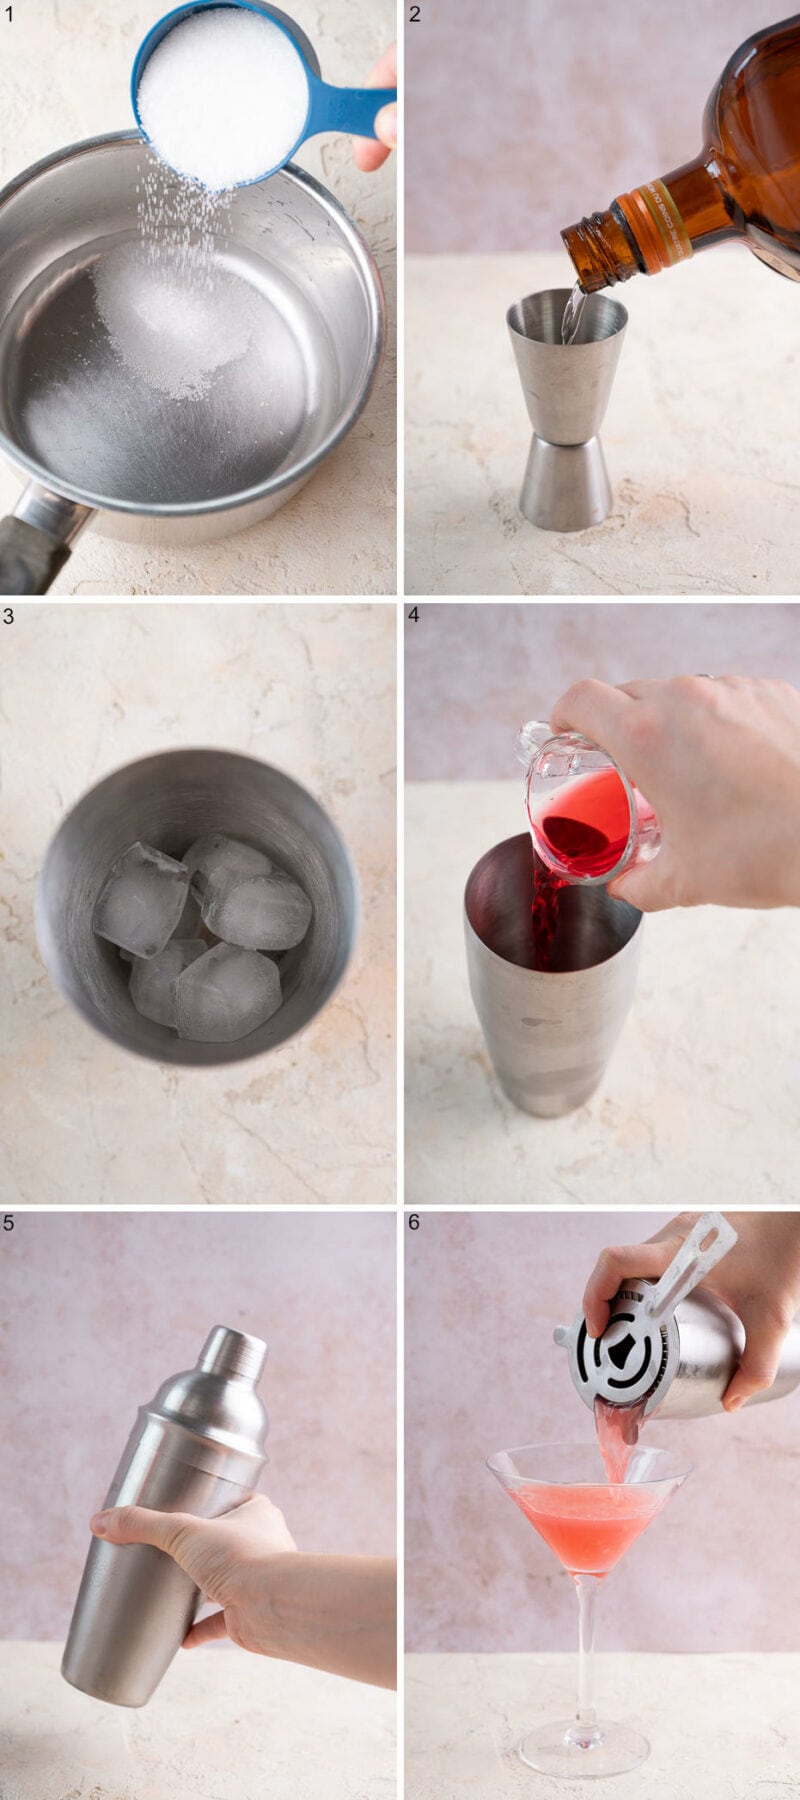 A collage of 6 photos showing how to prepare a cranberry martini step by step.